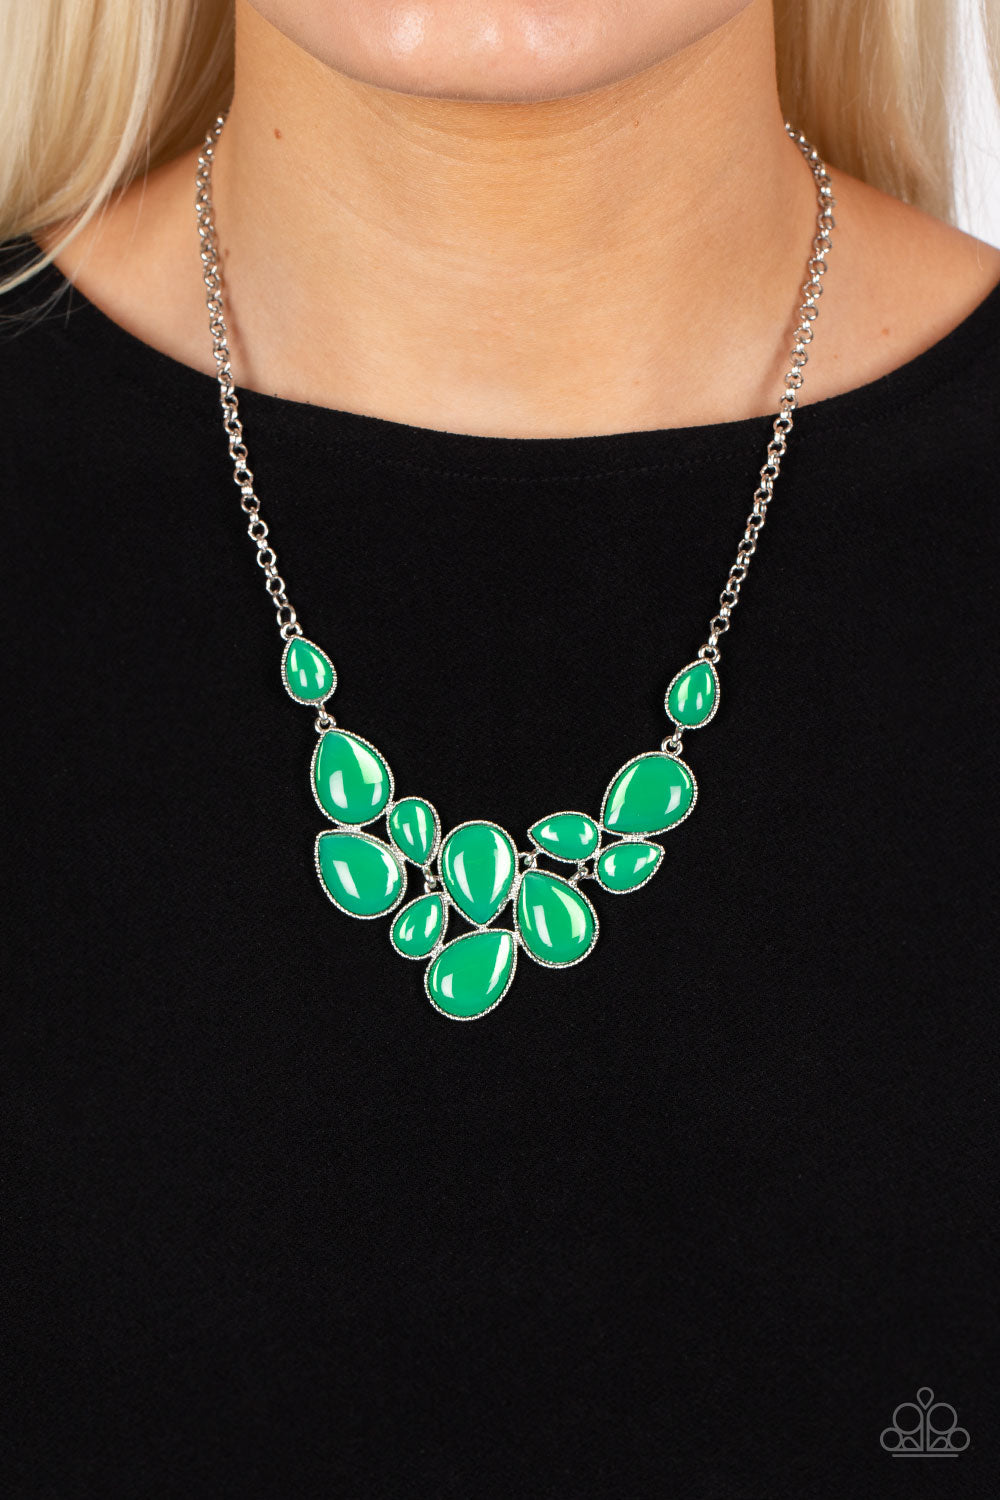 Keeps GLOWING and GLOWING - Green Paparazzi Necklace